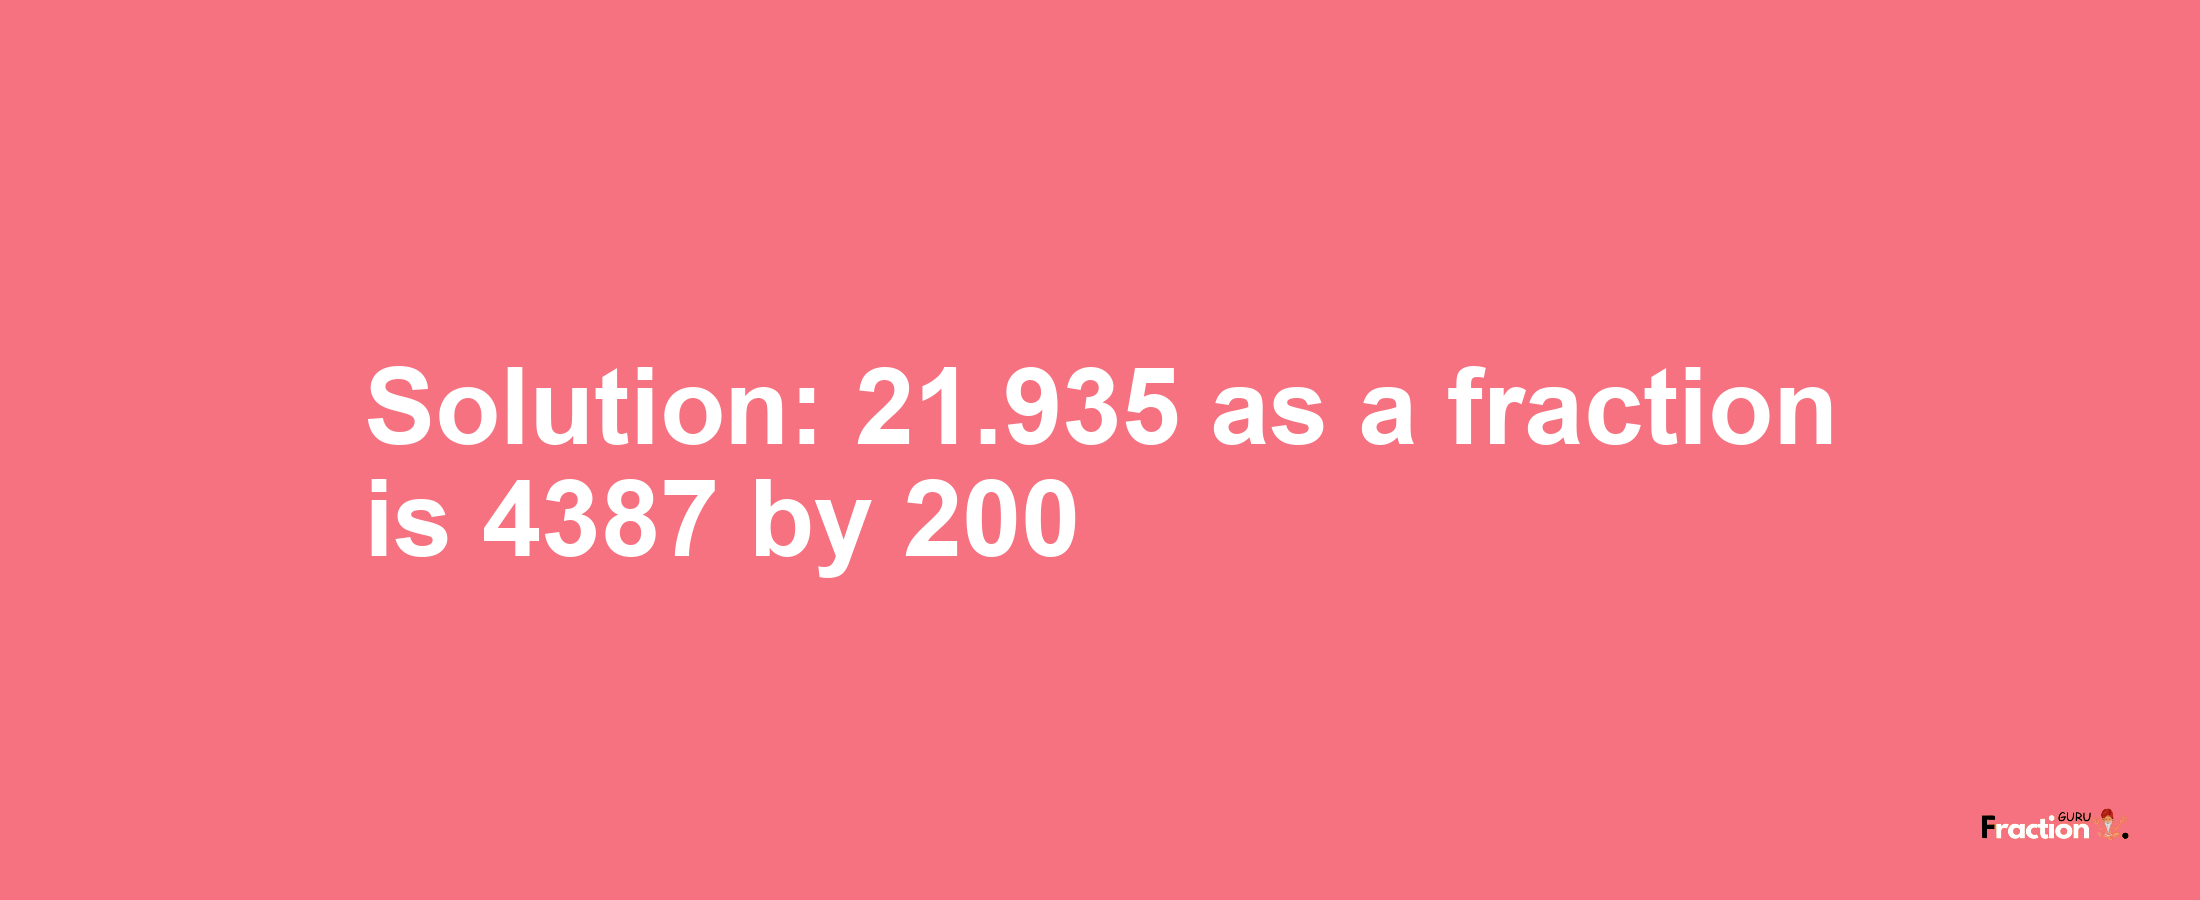 Solution:21.935 as a fraction is 4387/200